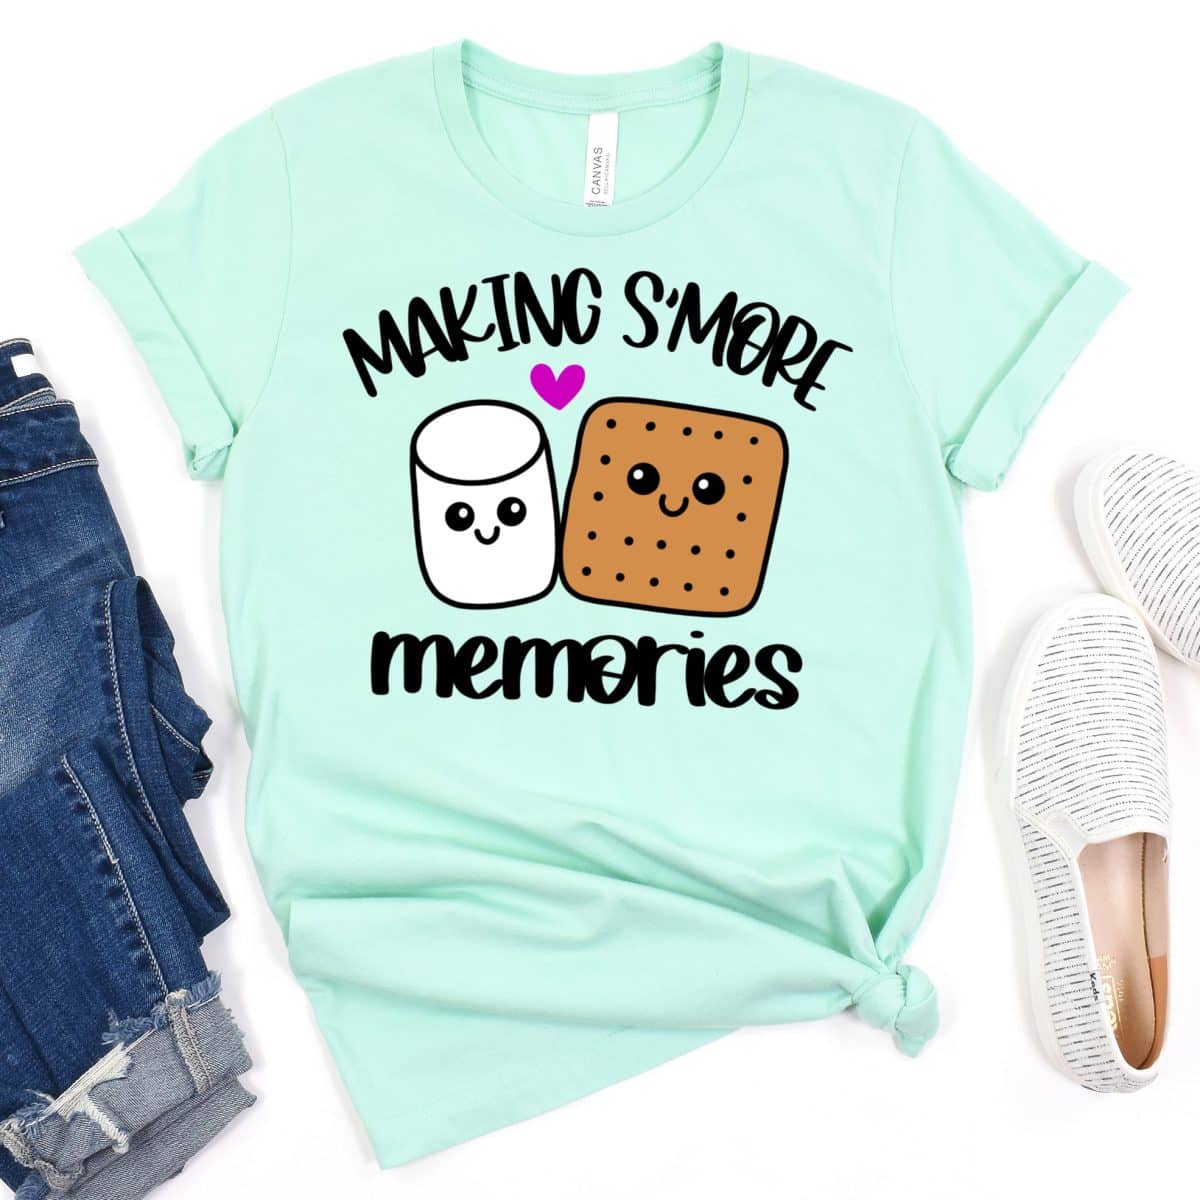 Making S'more Memories Shirt by Hello Creative Family